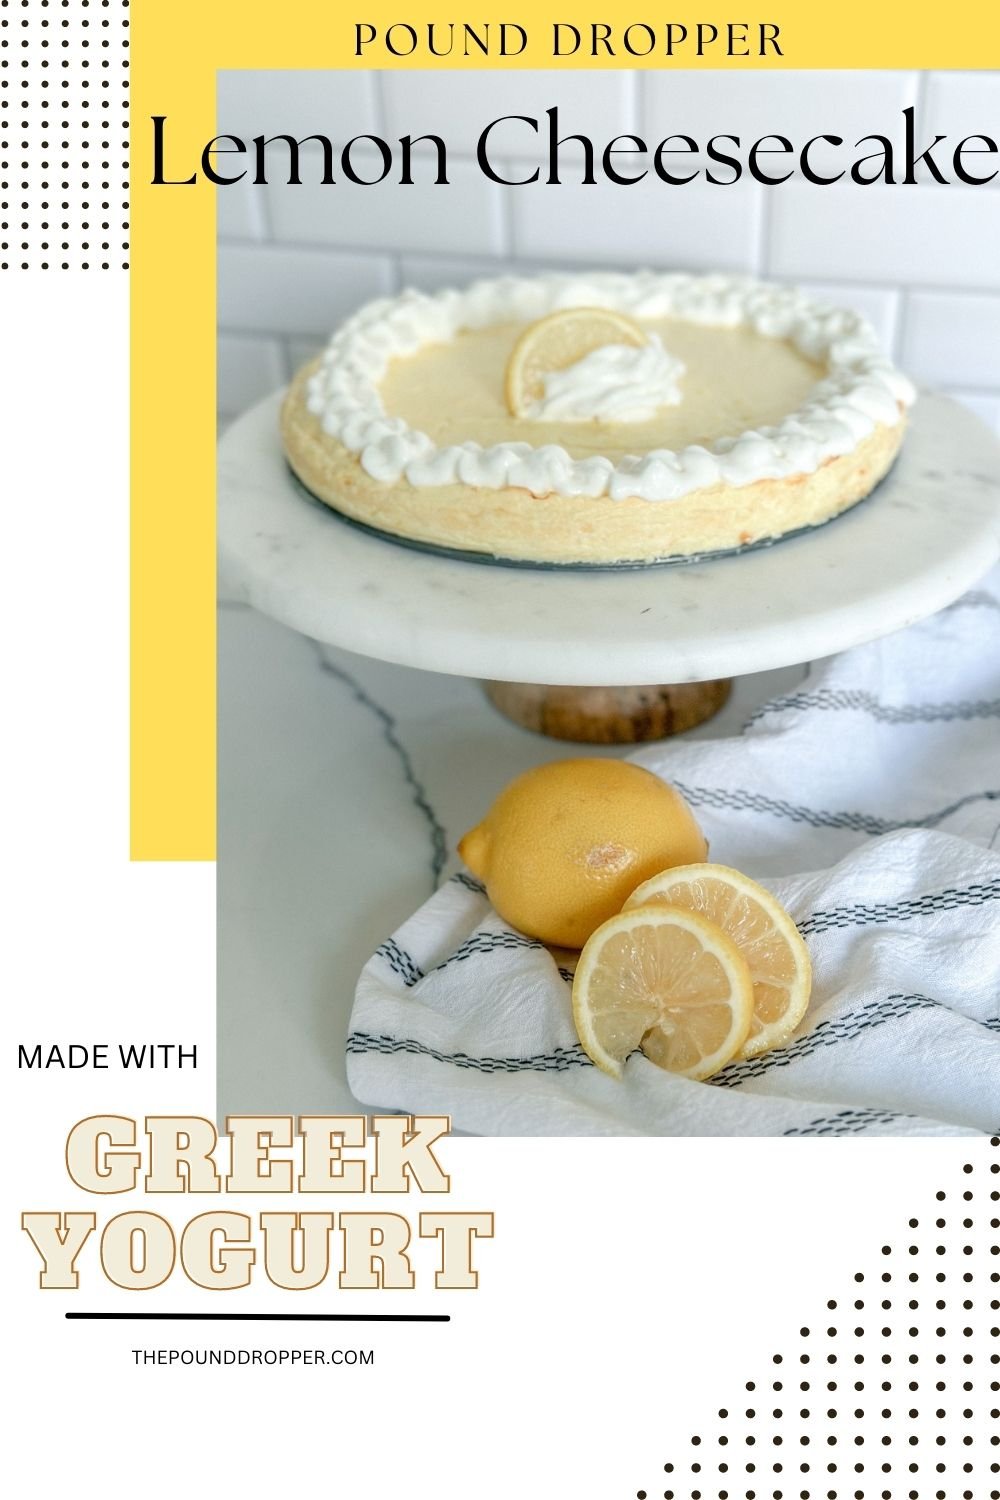 A Low Point Lemon Cheesecake made with Greek yogurt, eggs, and sugar free pudding mix makes for guilt-free sweet dessert. via @pounddropper